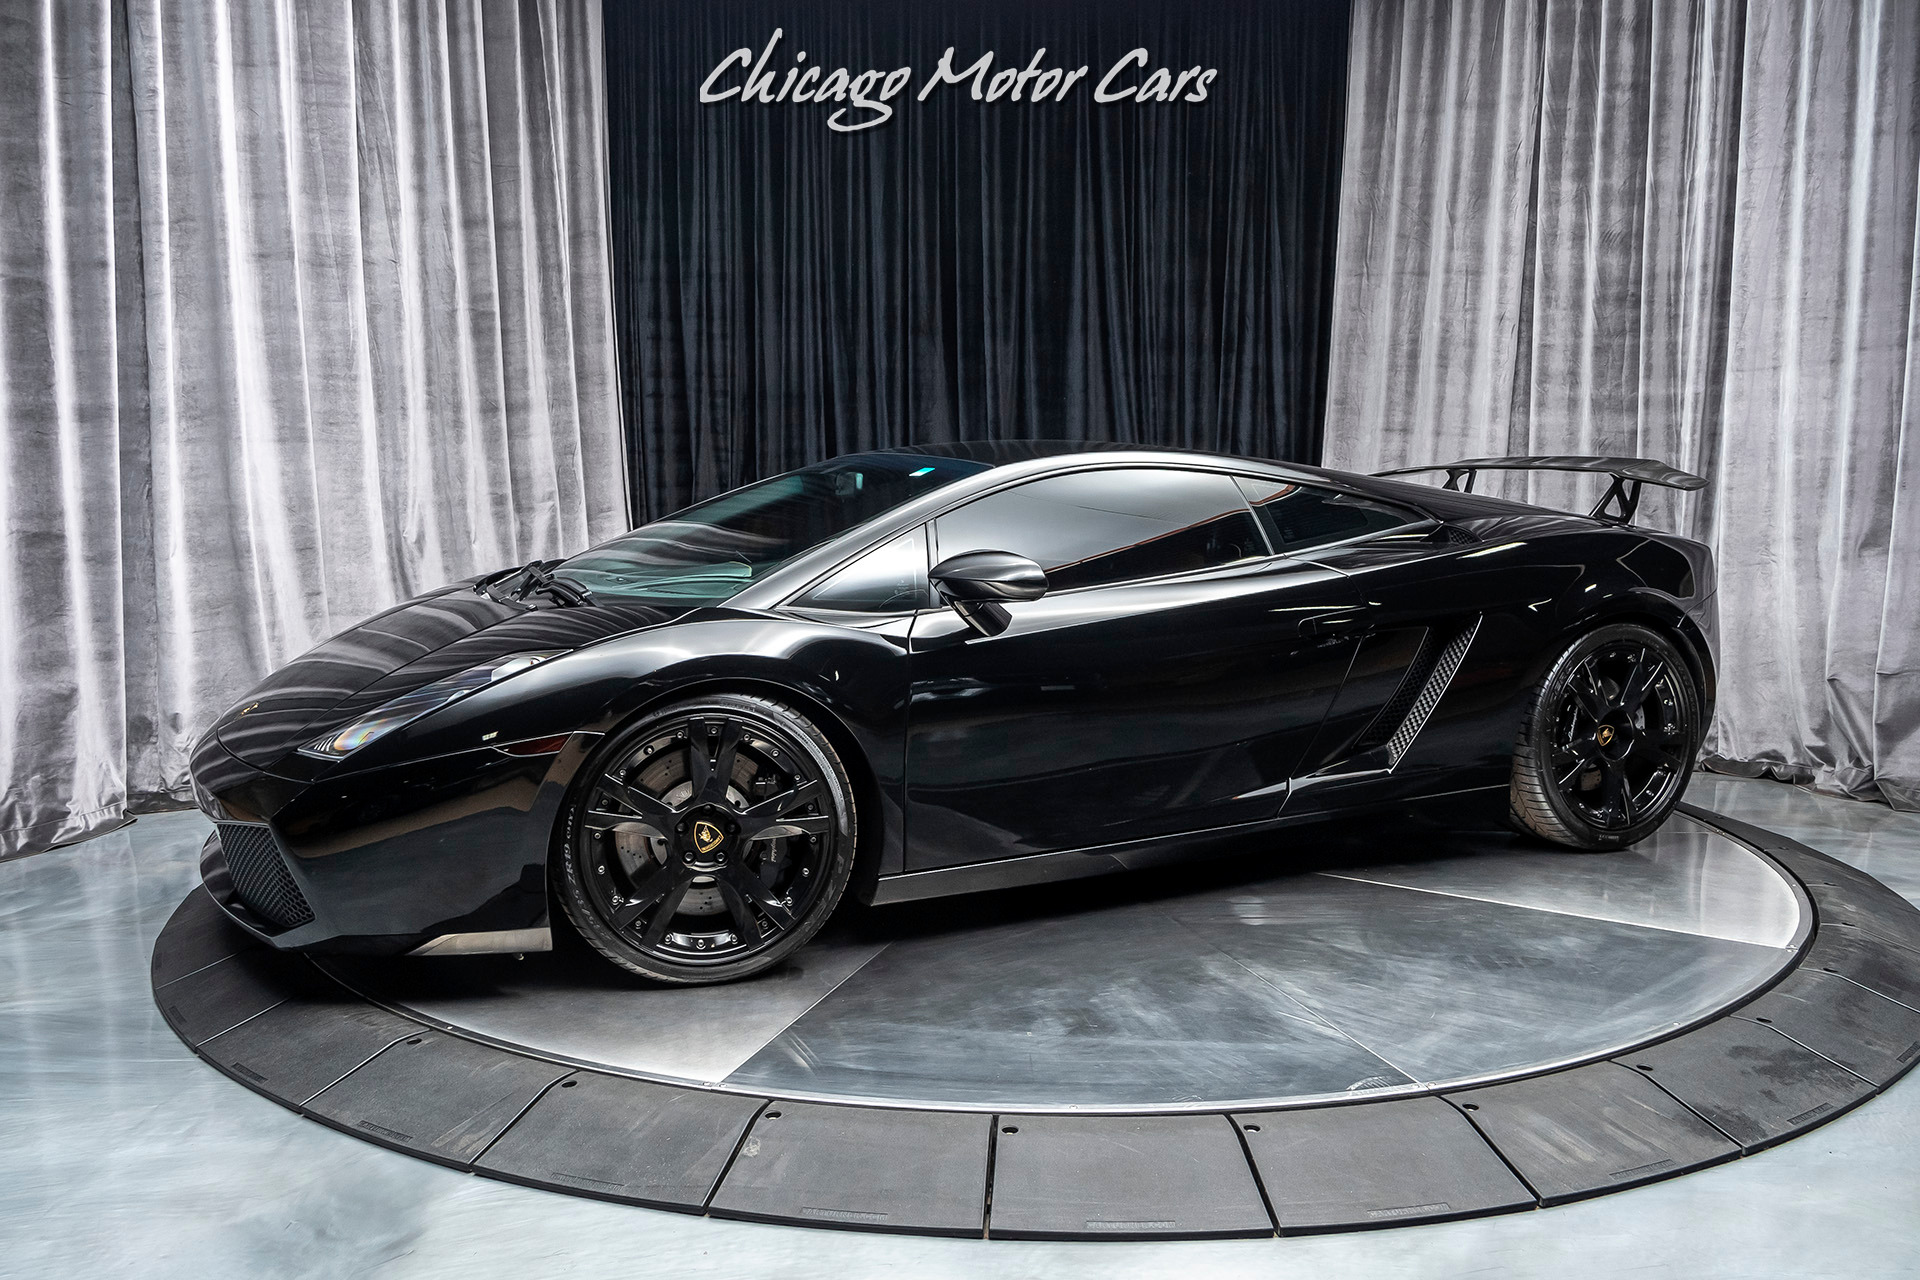 Used 2004 Lamborghini Gallardo E-Gear Coupe *ONLY 14K MILES!* For Sale  (Special Pricing) | Chicago Motor Cars Stock #16945